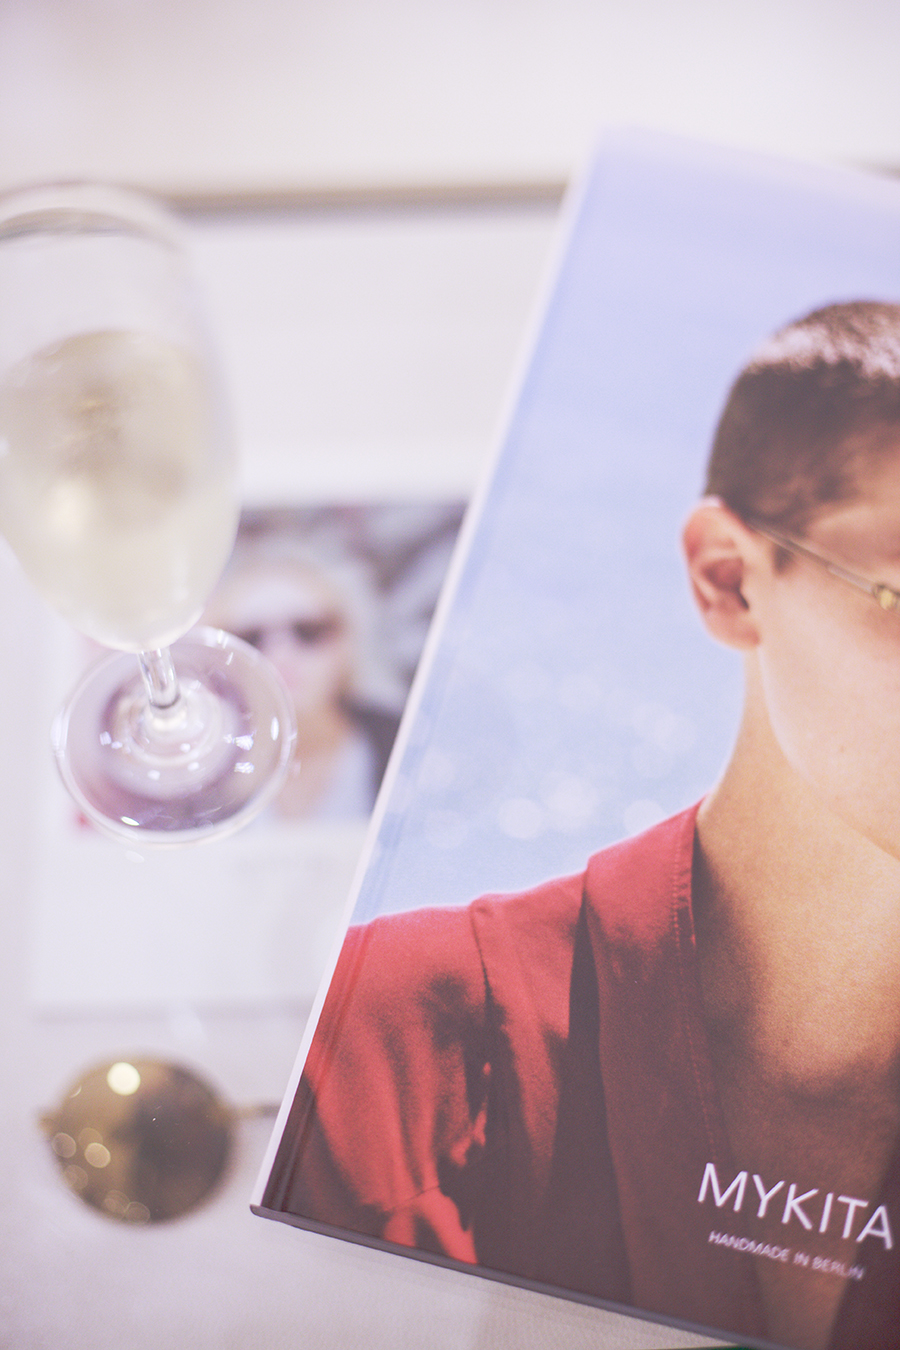 Mykita lookbook and champagne at the Her World x Optic Butler Event, Paragon, Singapore.